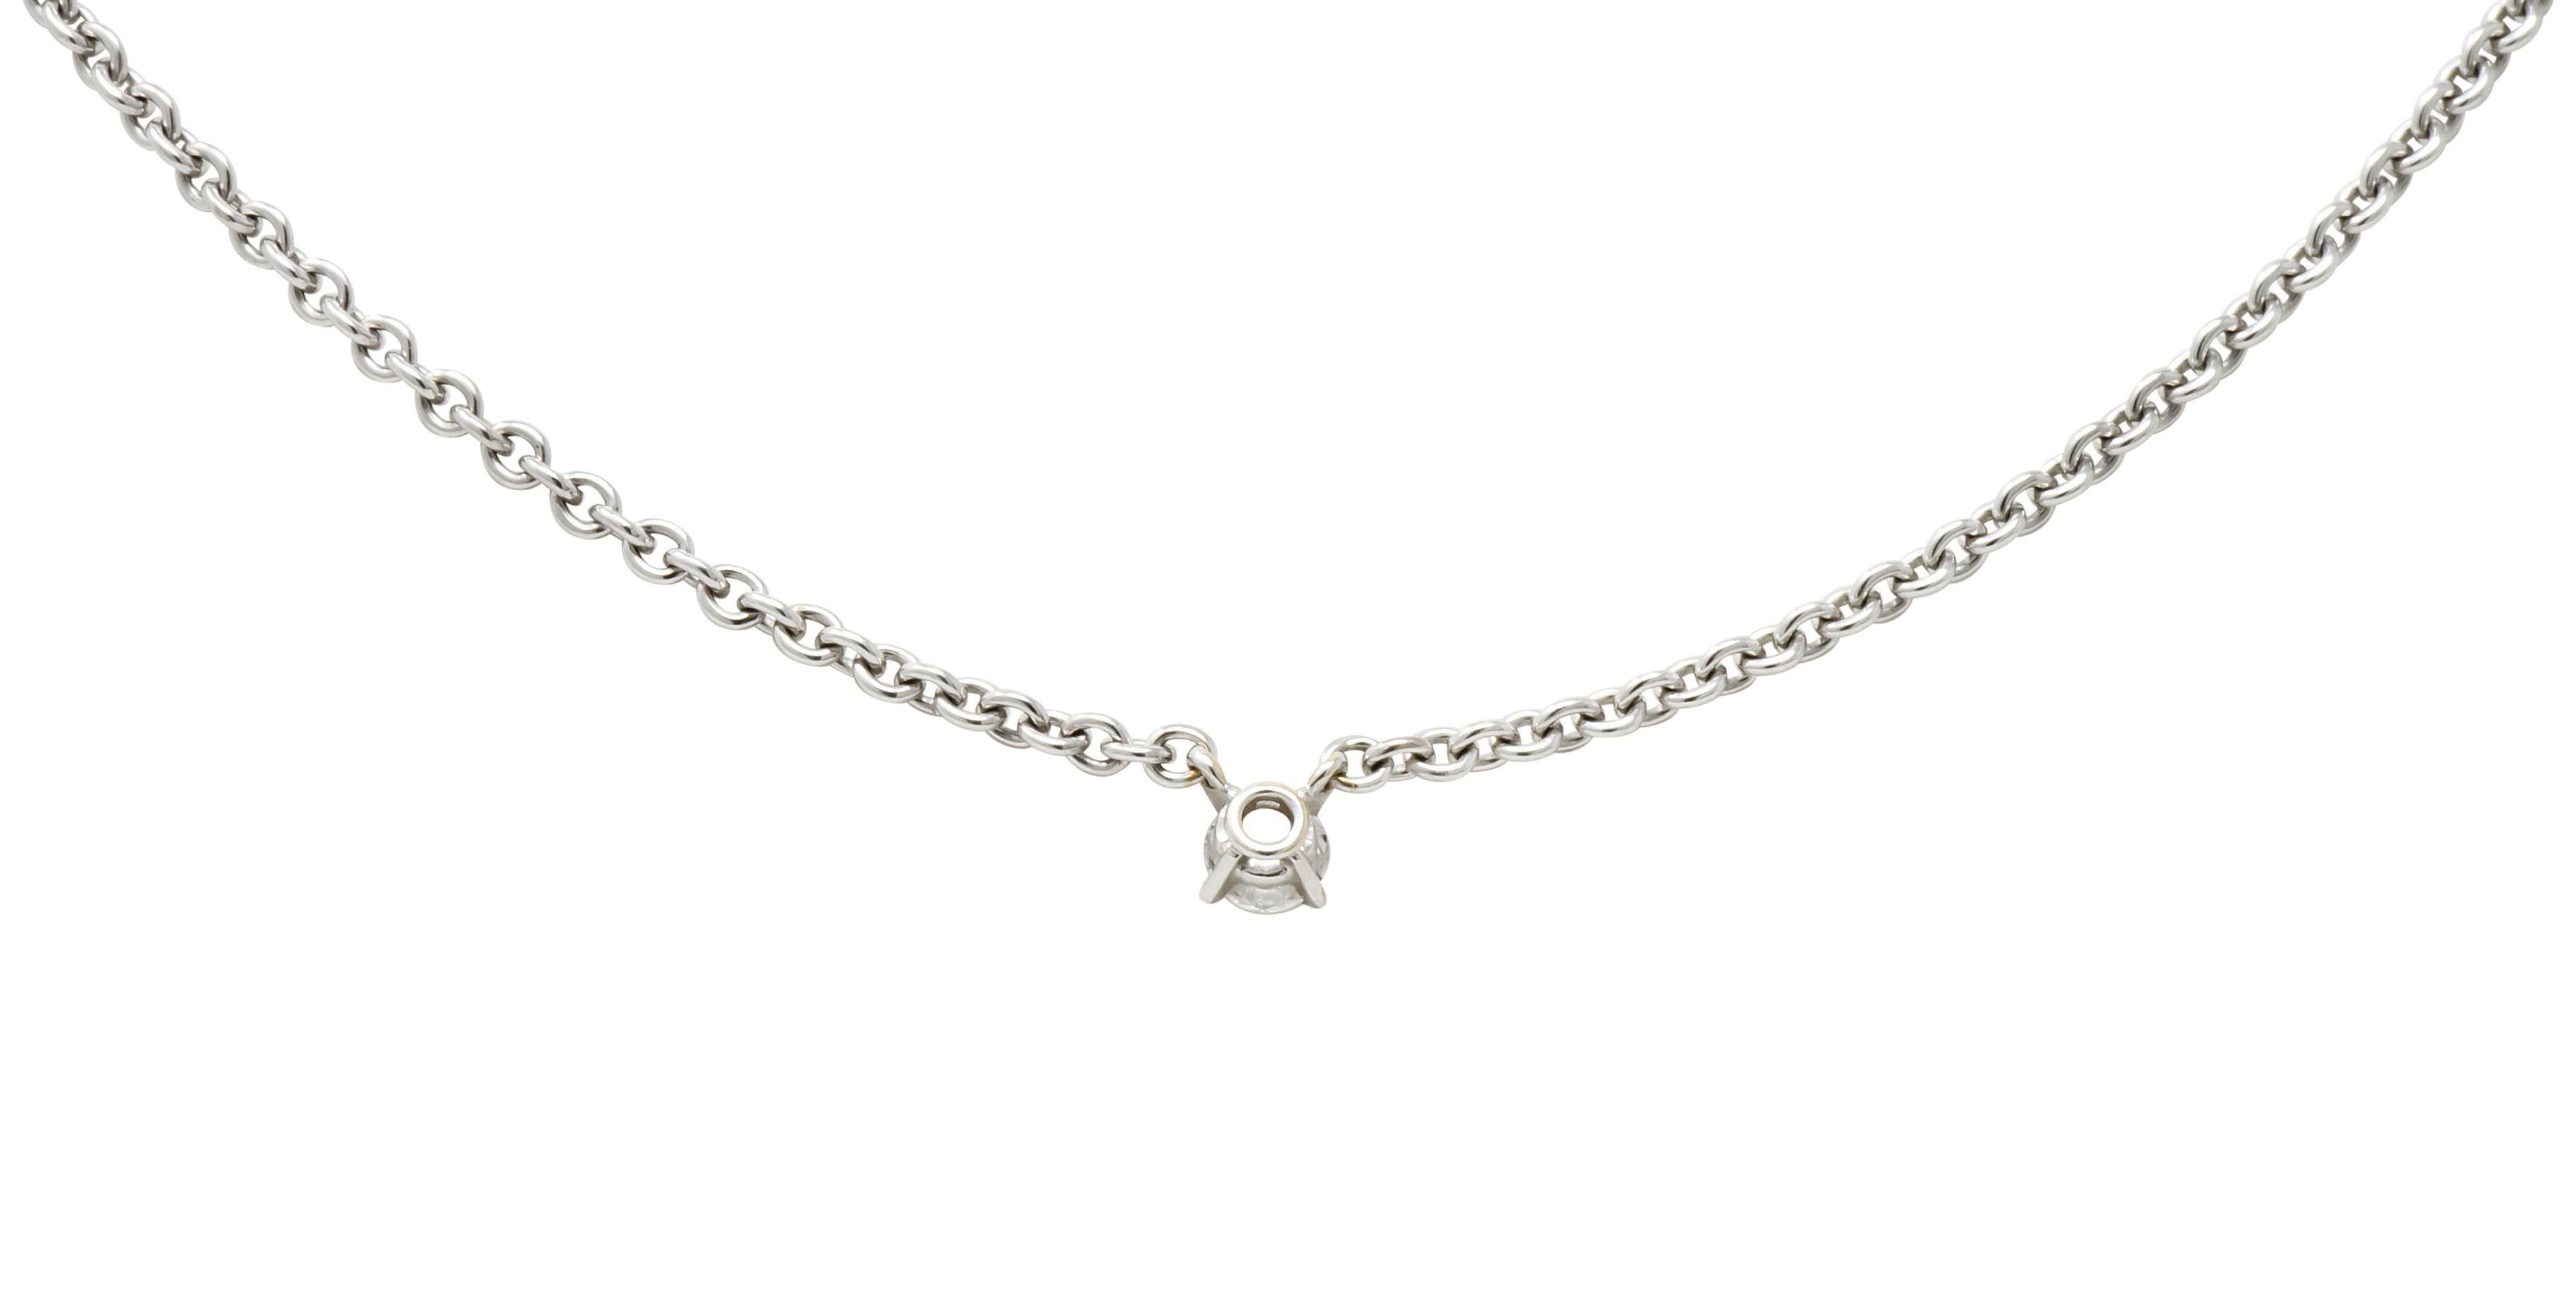 Cartier Diamond 18 Karat White Gold Contemporary French Solitaire Necklace 3